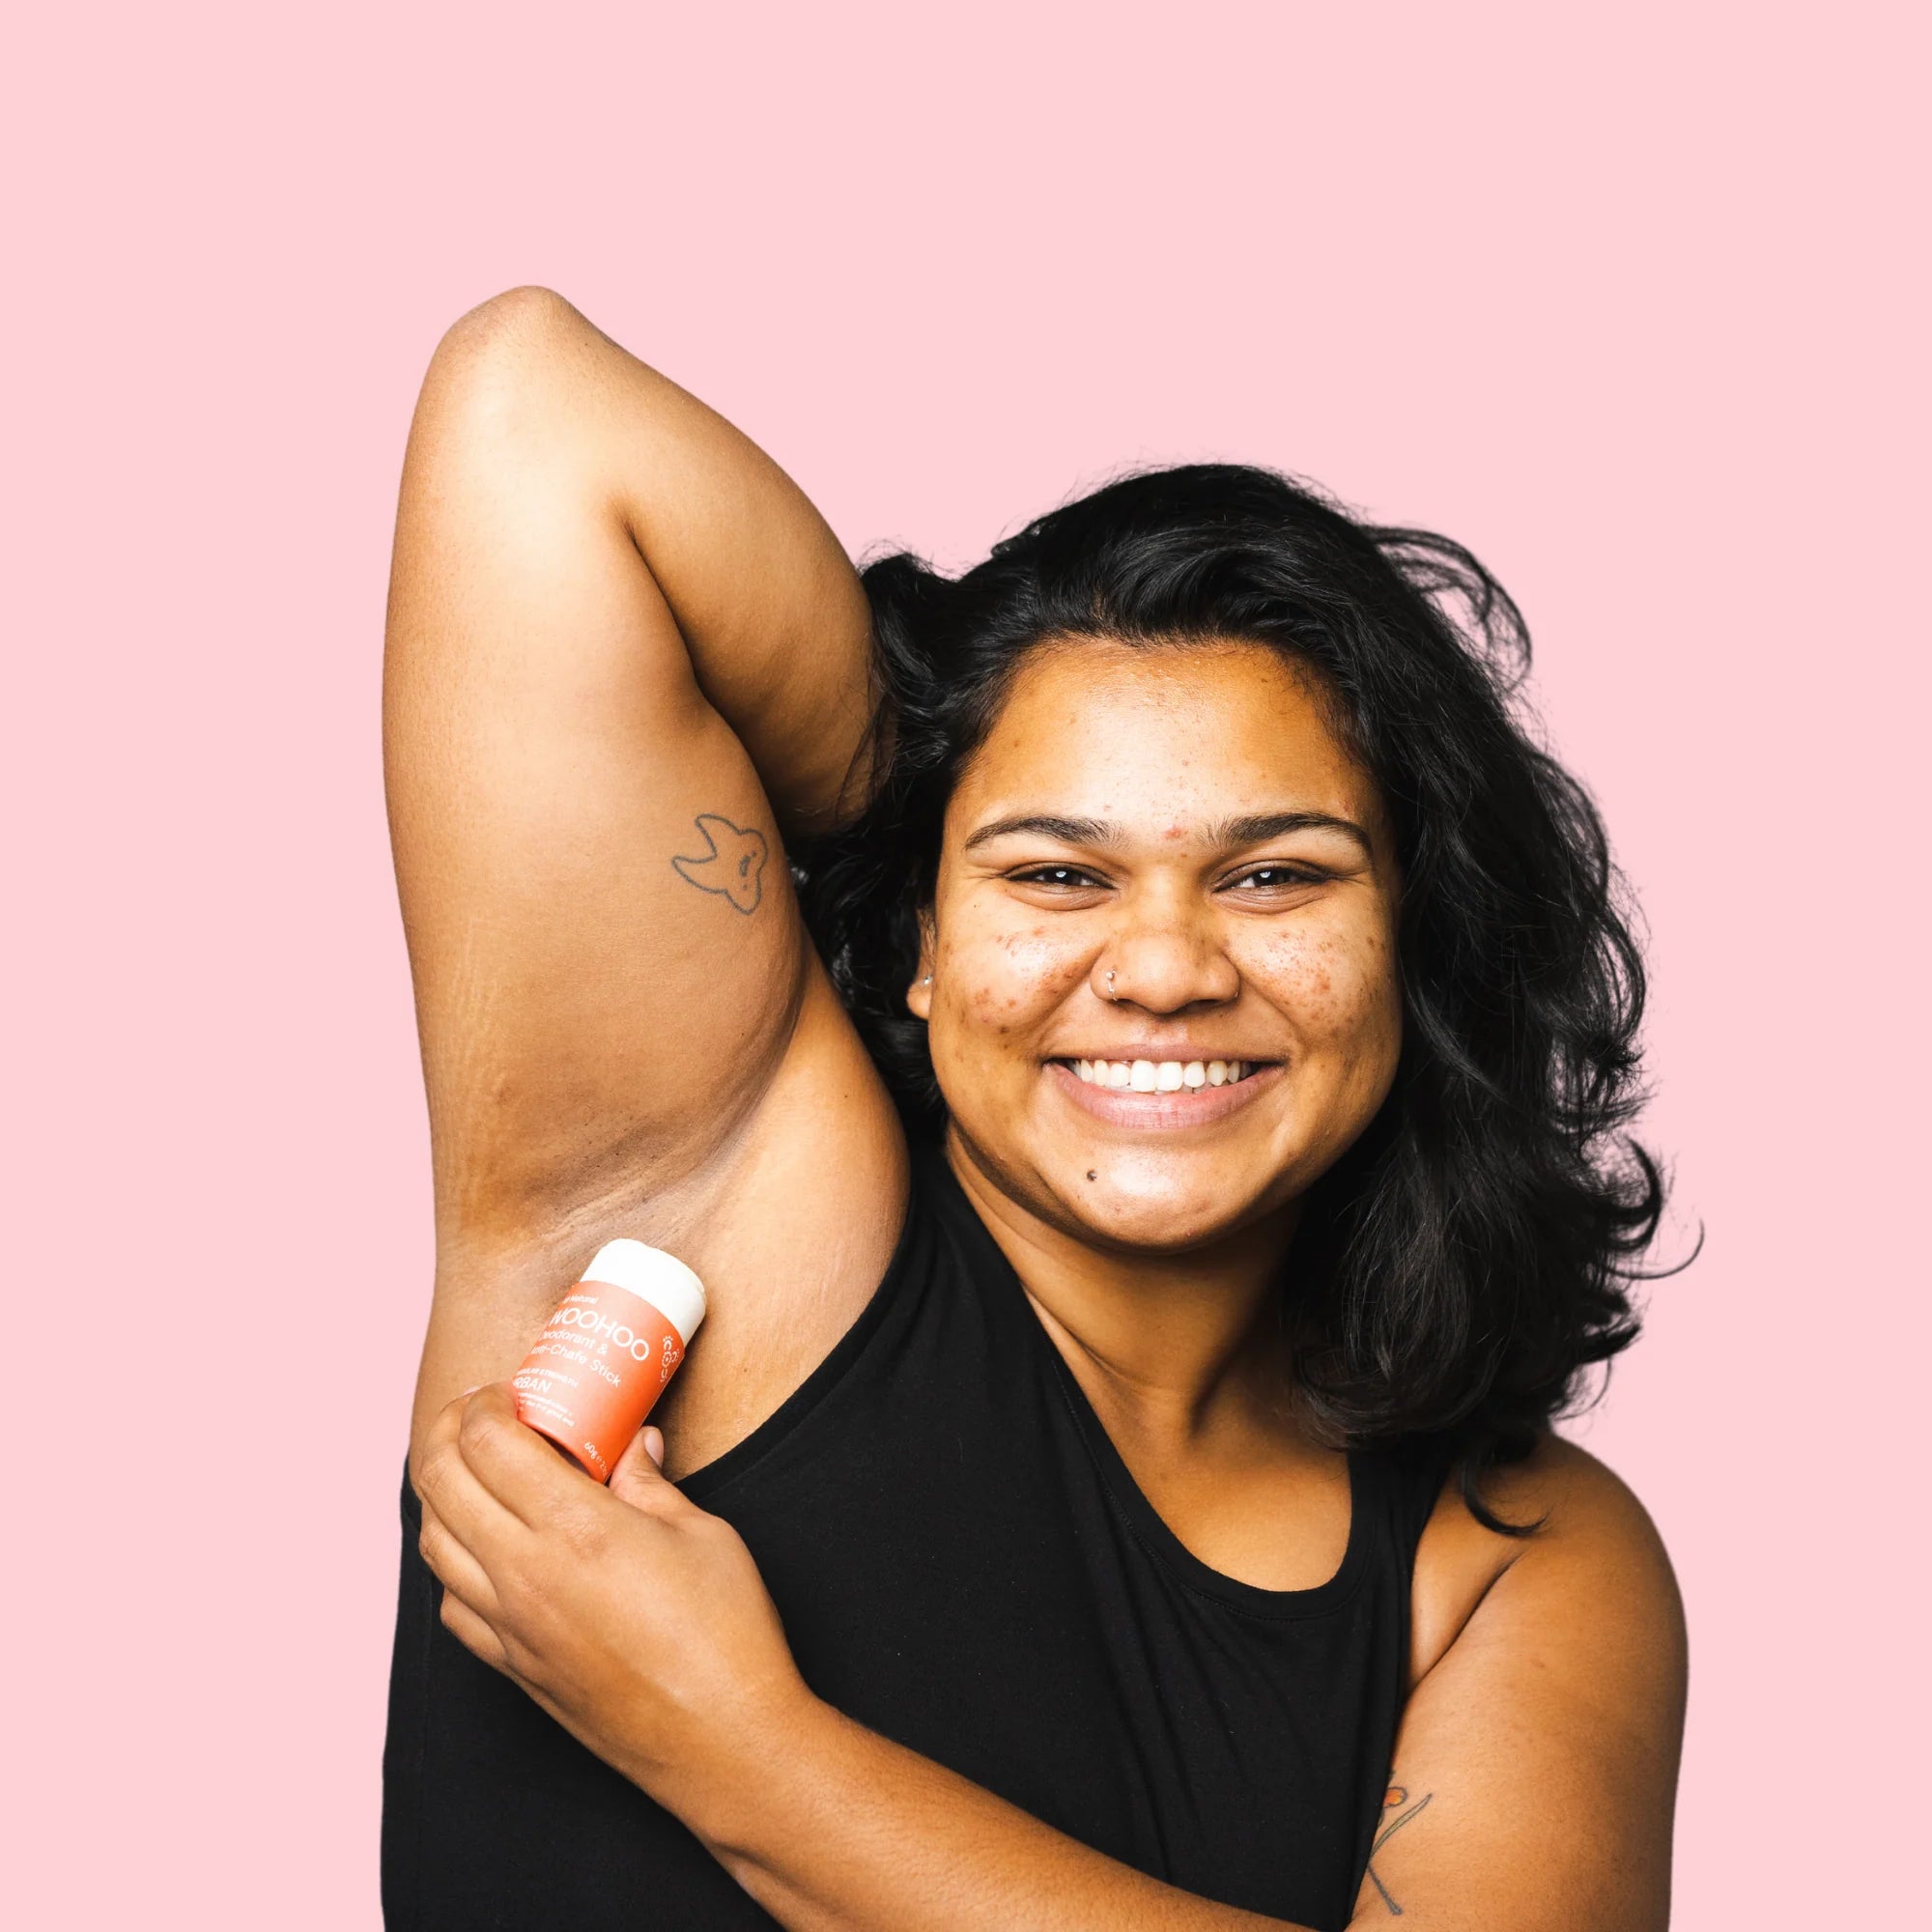 Image of a woman in a black sleeveless shirt smiling to the camera and holding her arm up as she is applying an opened Urban Natural Deodorant Stick with her other hand in front of a pink background